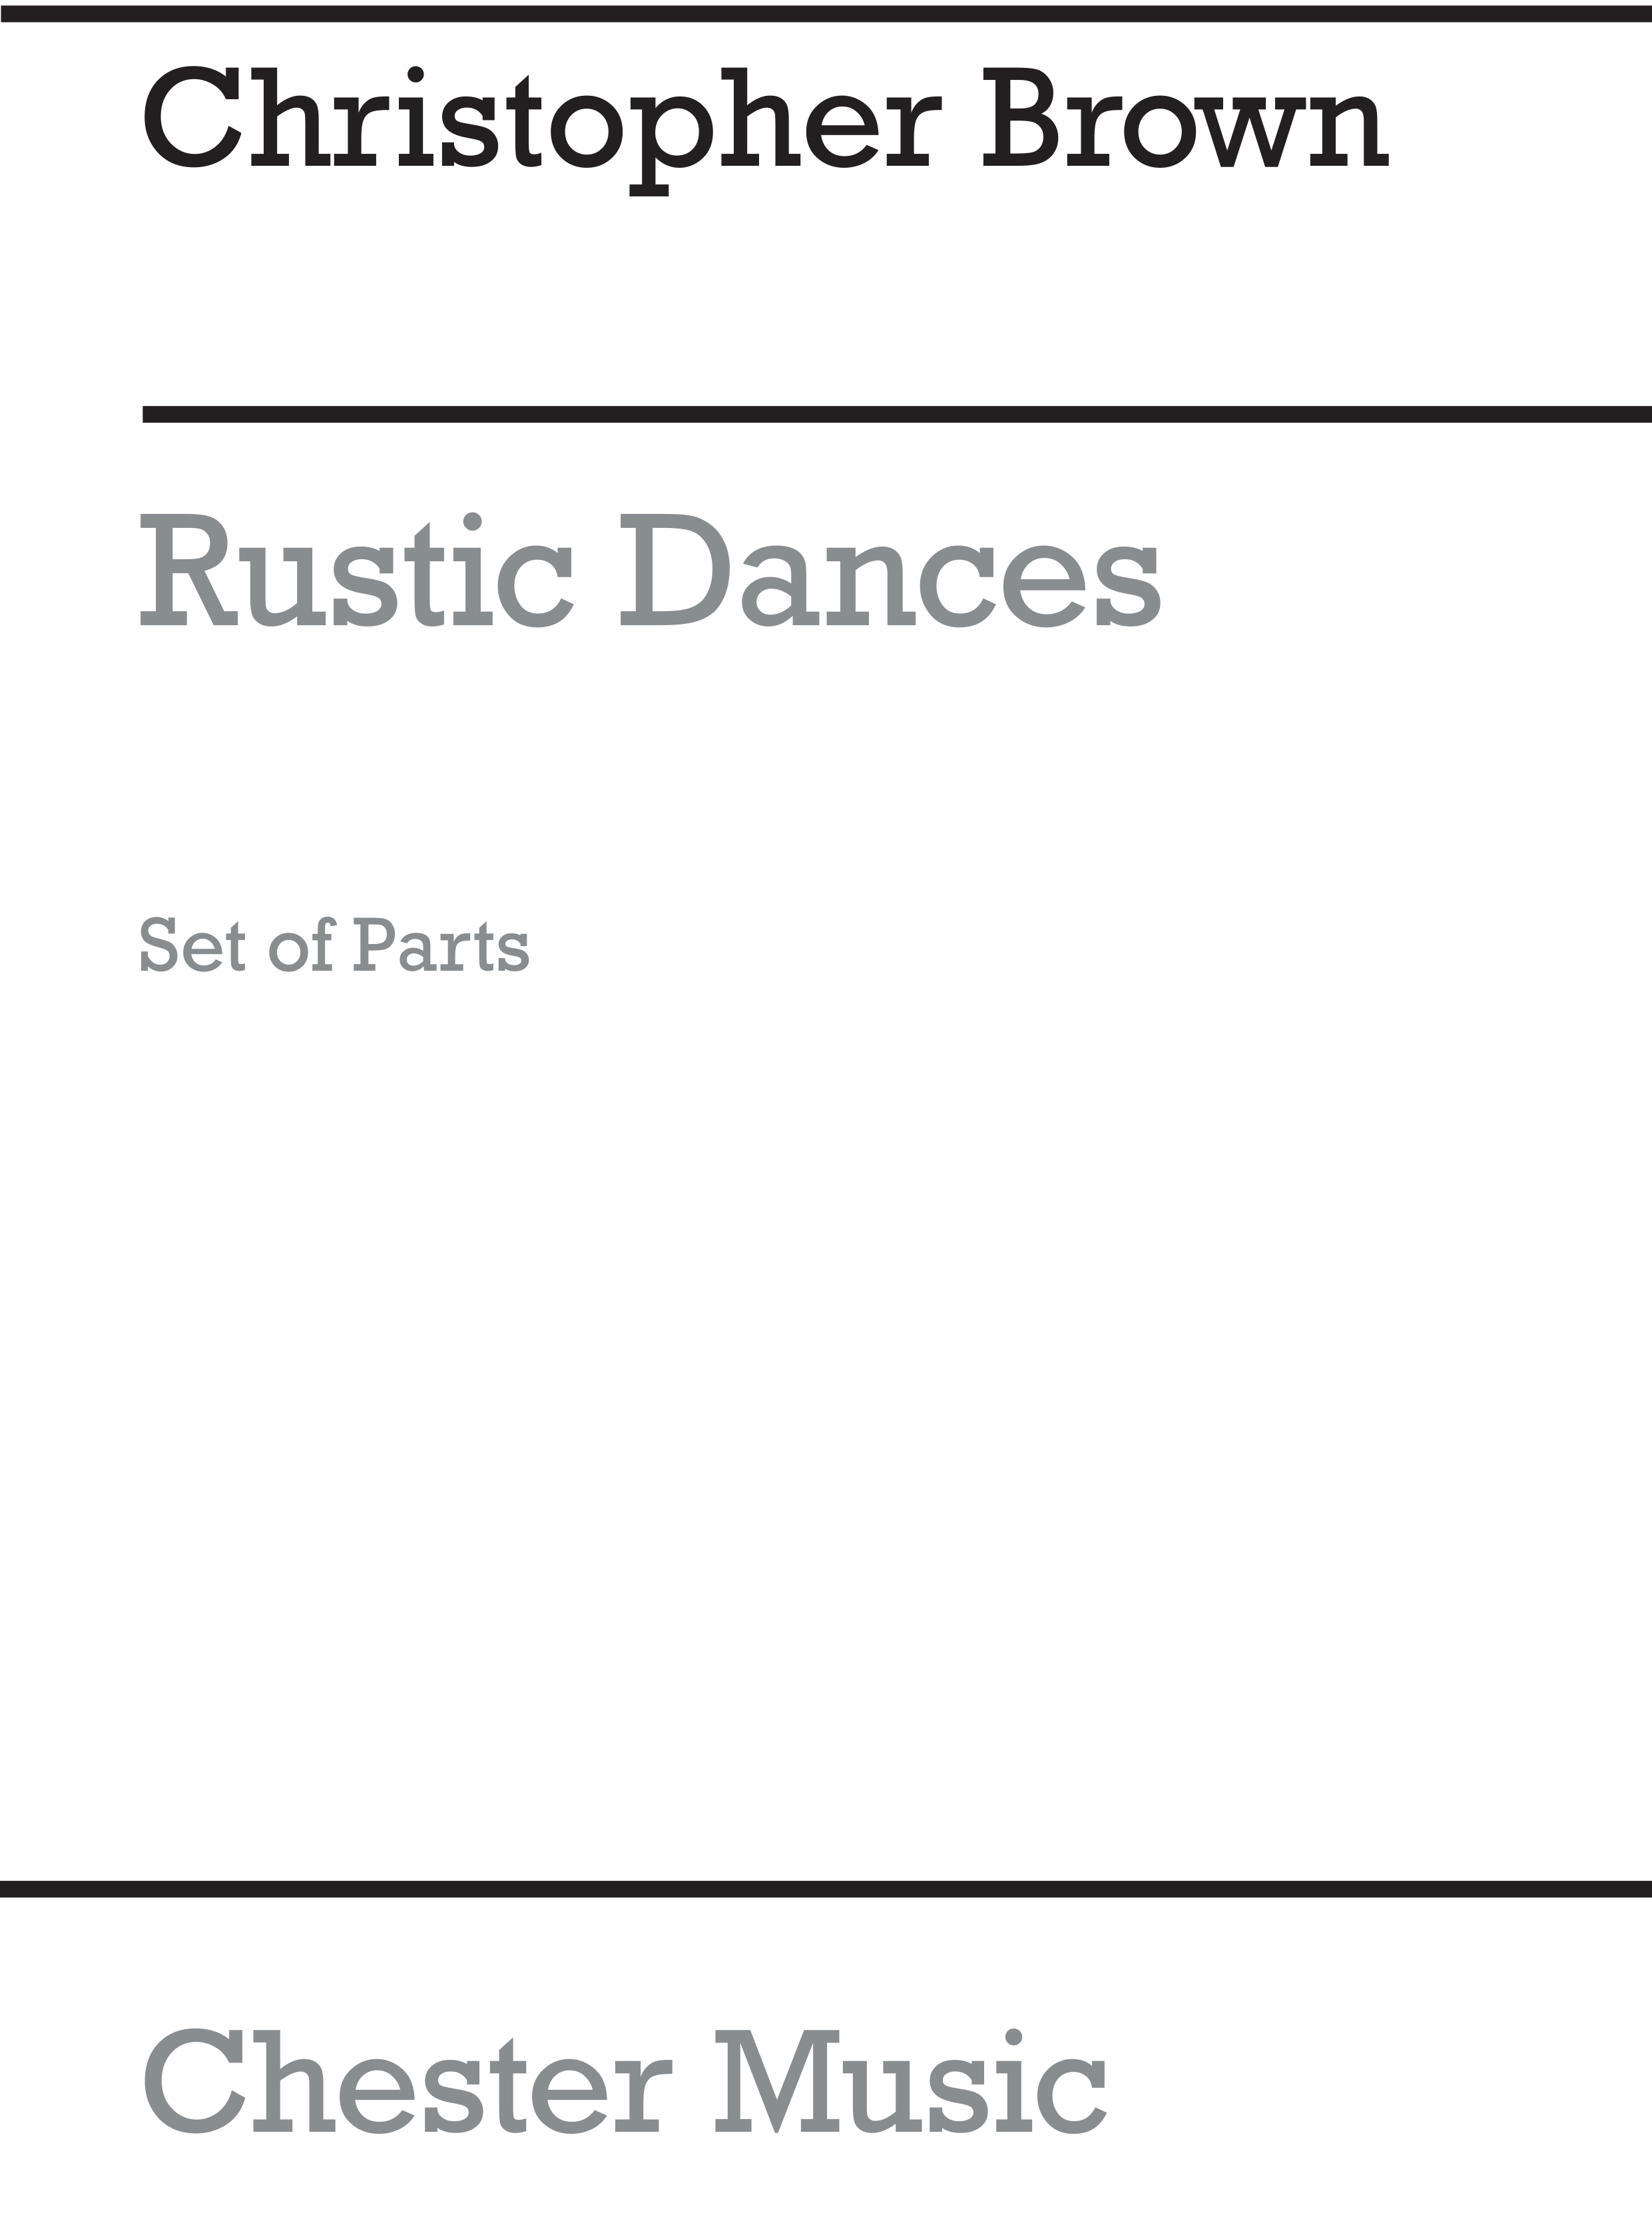 Christopher Brown: Playstrings Moderately Easy No. 10 Rustic Dances: Orchestra: